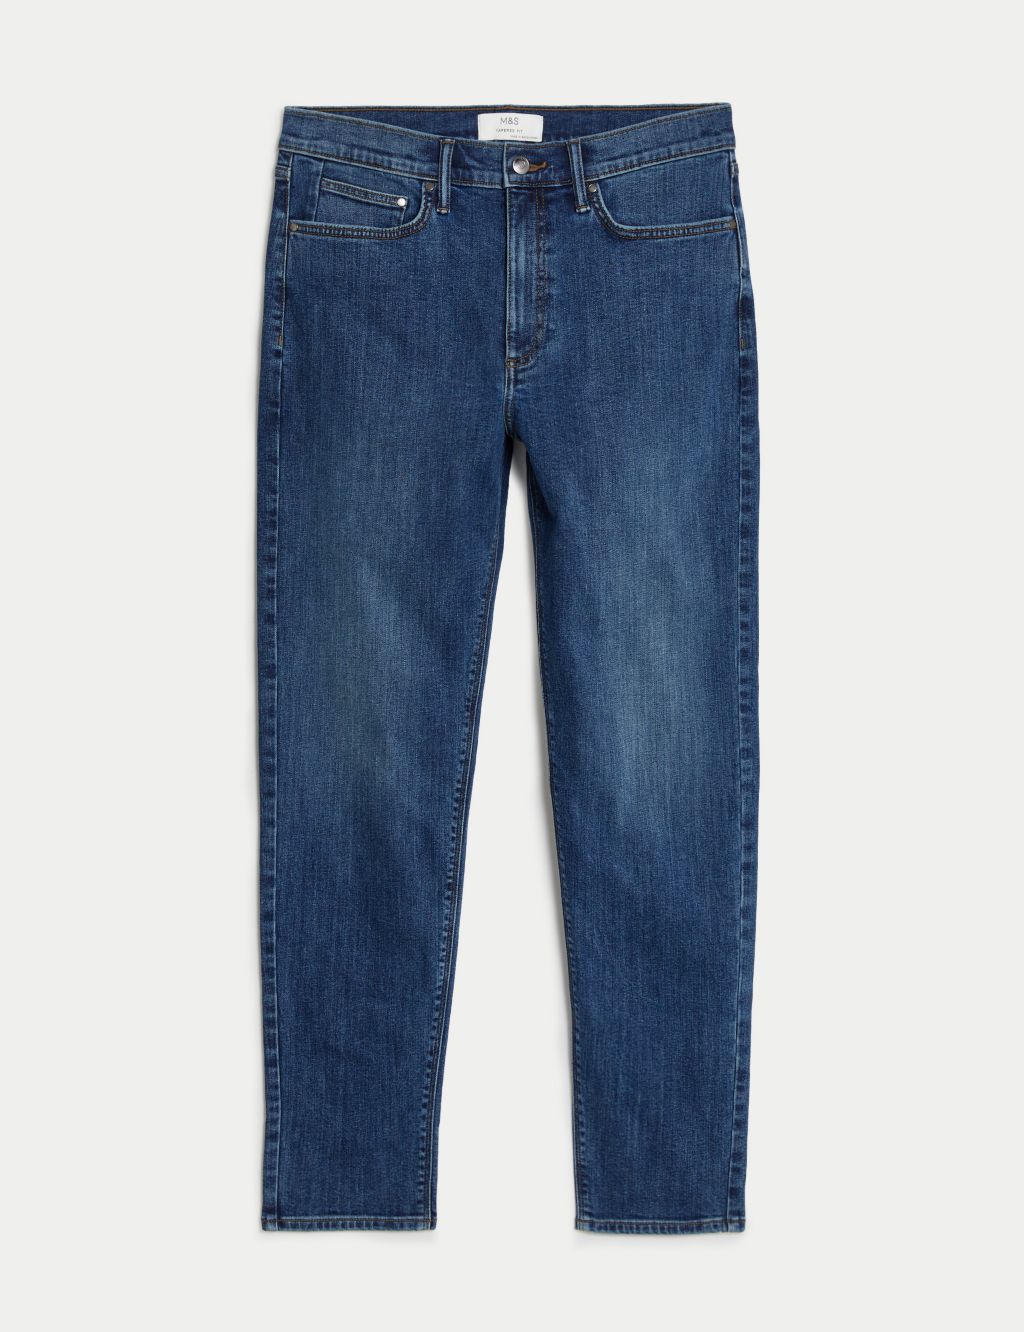 Tapered Fit Stretch Jeans image 2